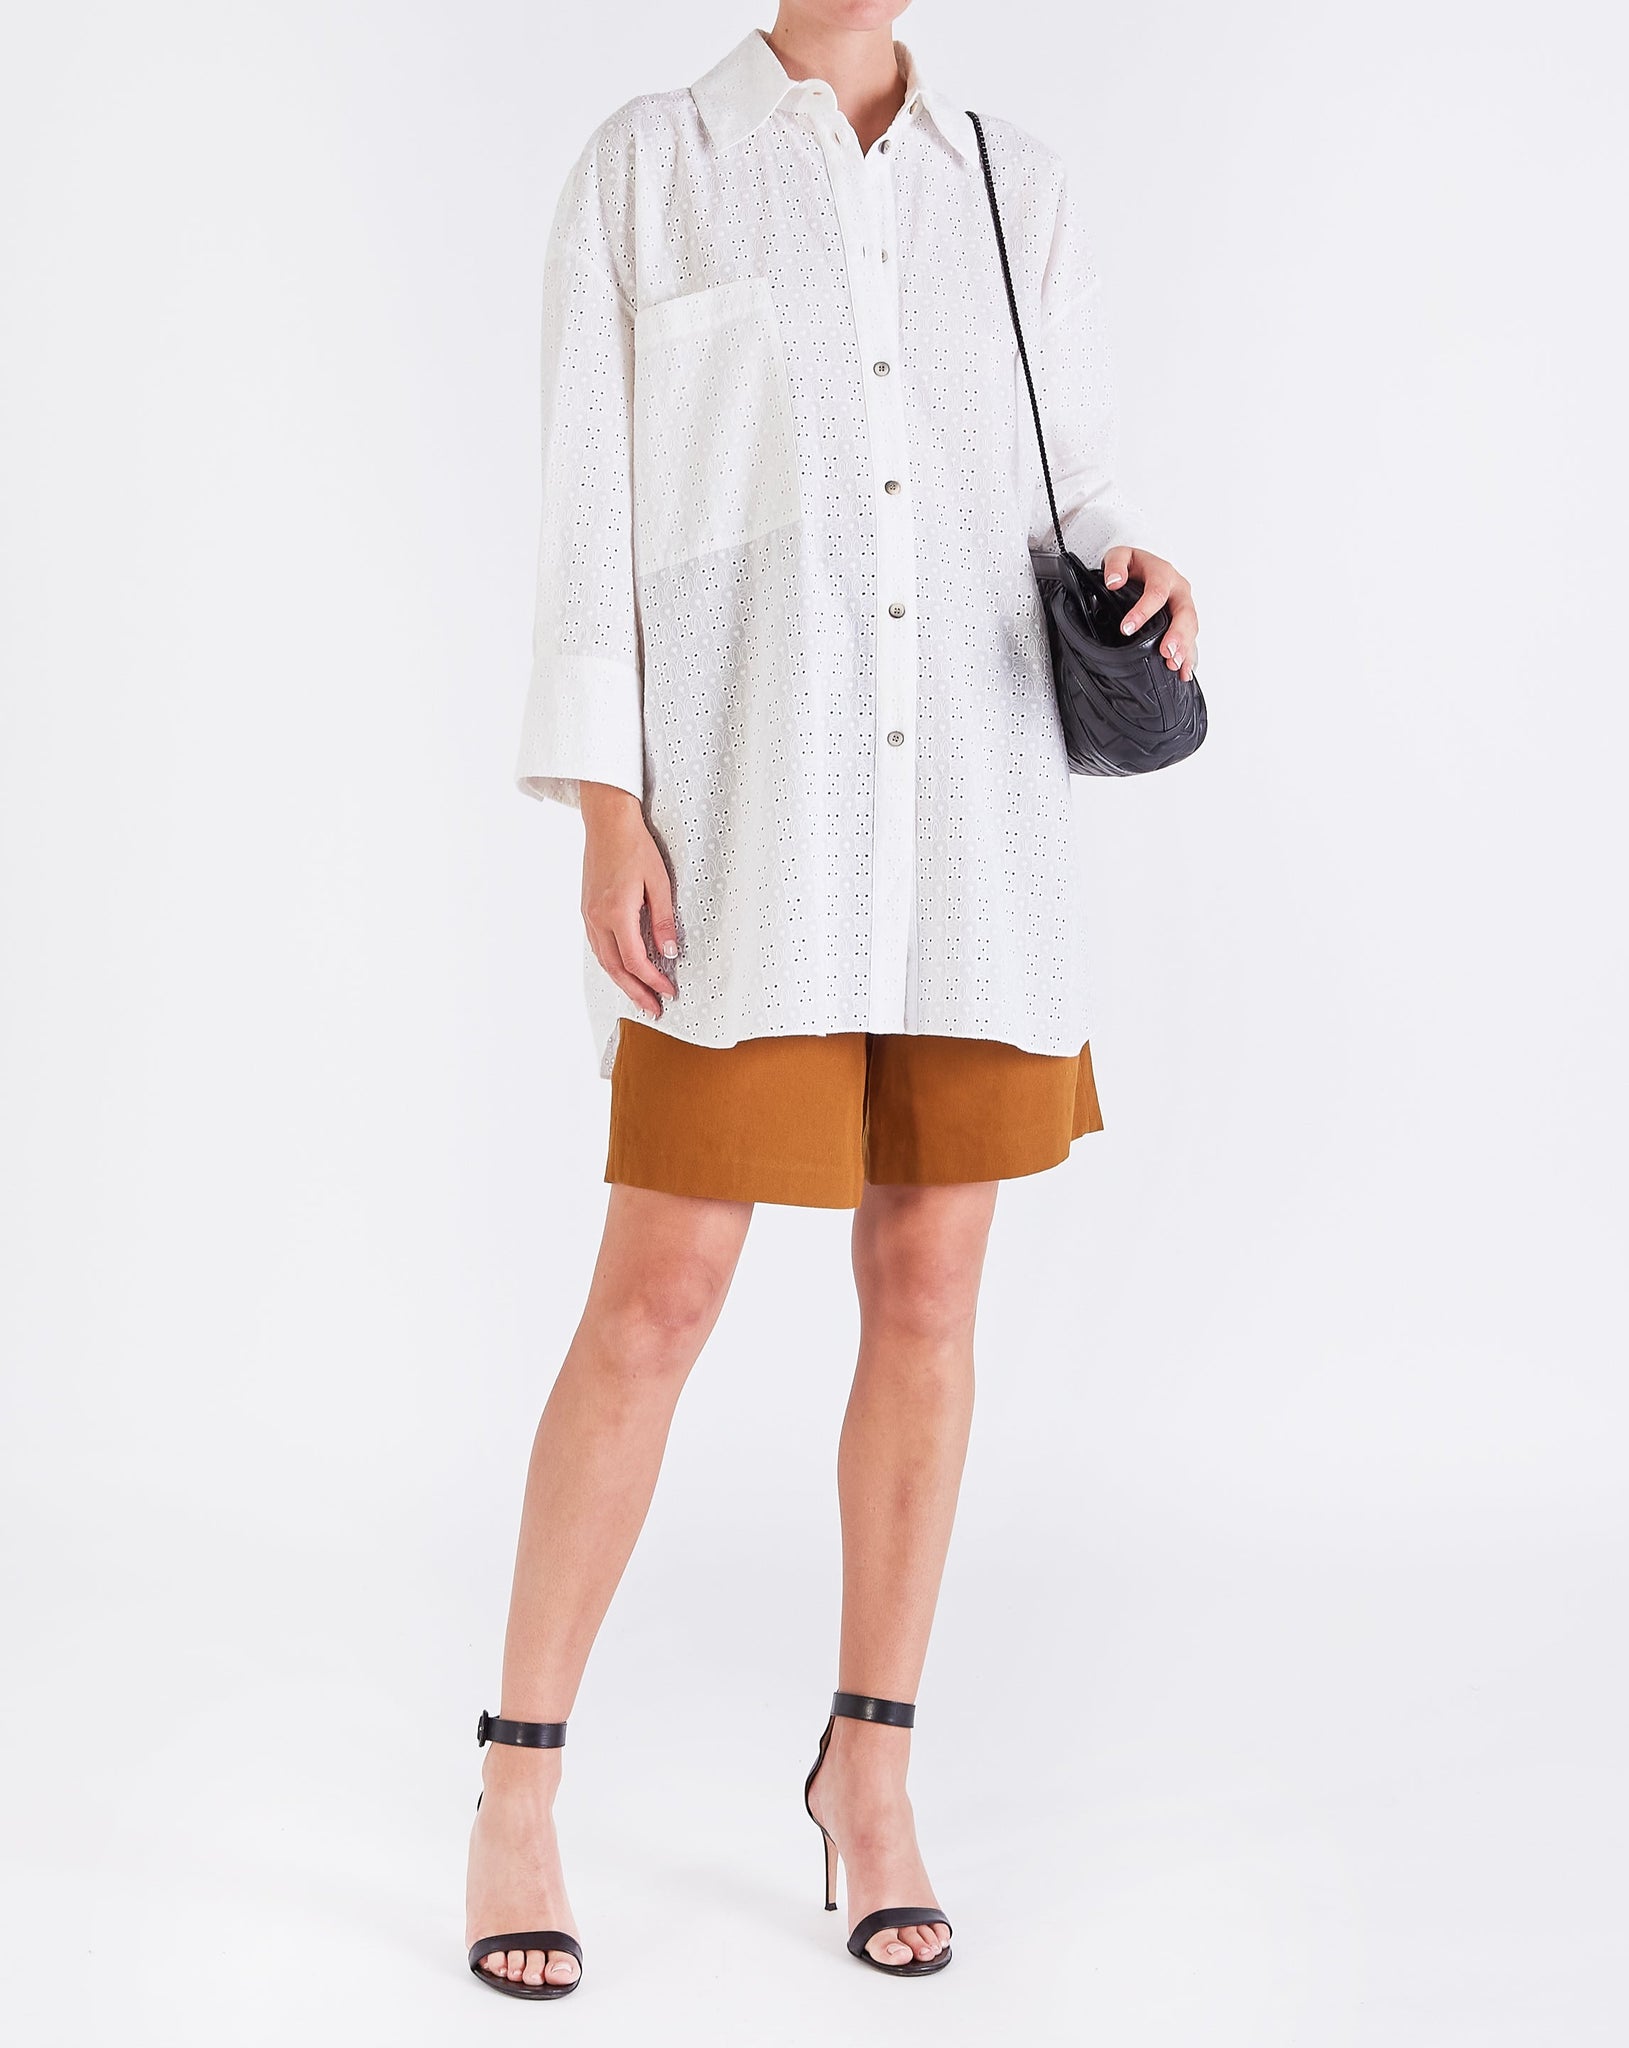 Clio BRODERIE OVERSIZED SHIRT - OFF WHITE